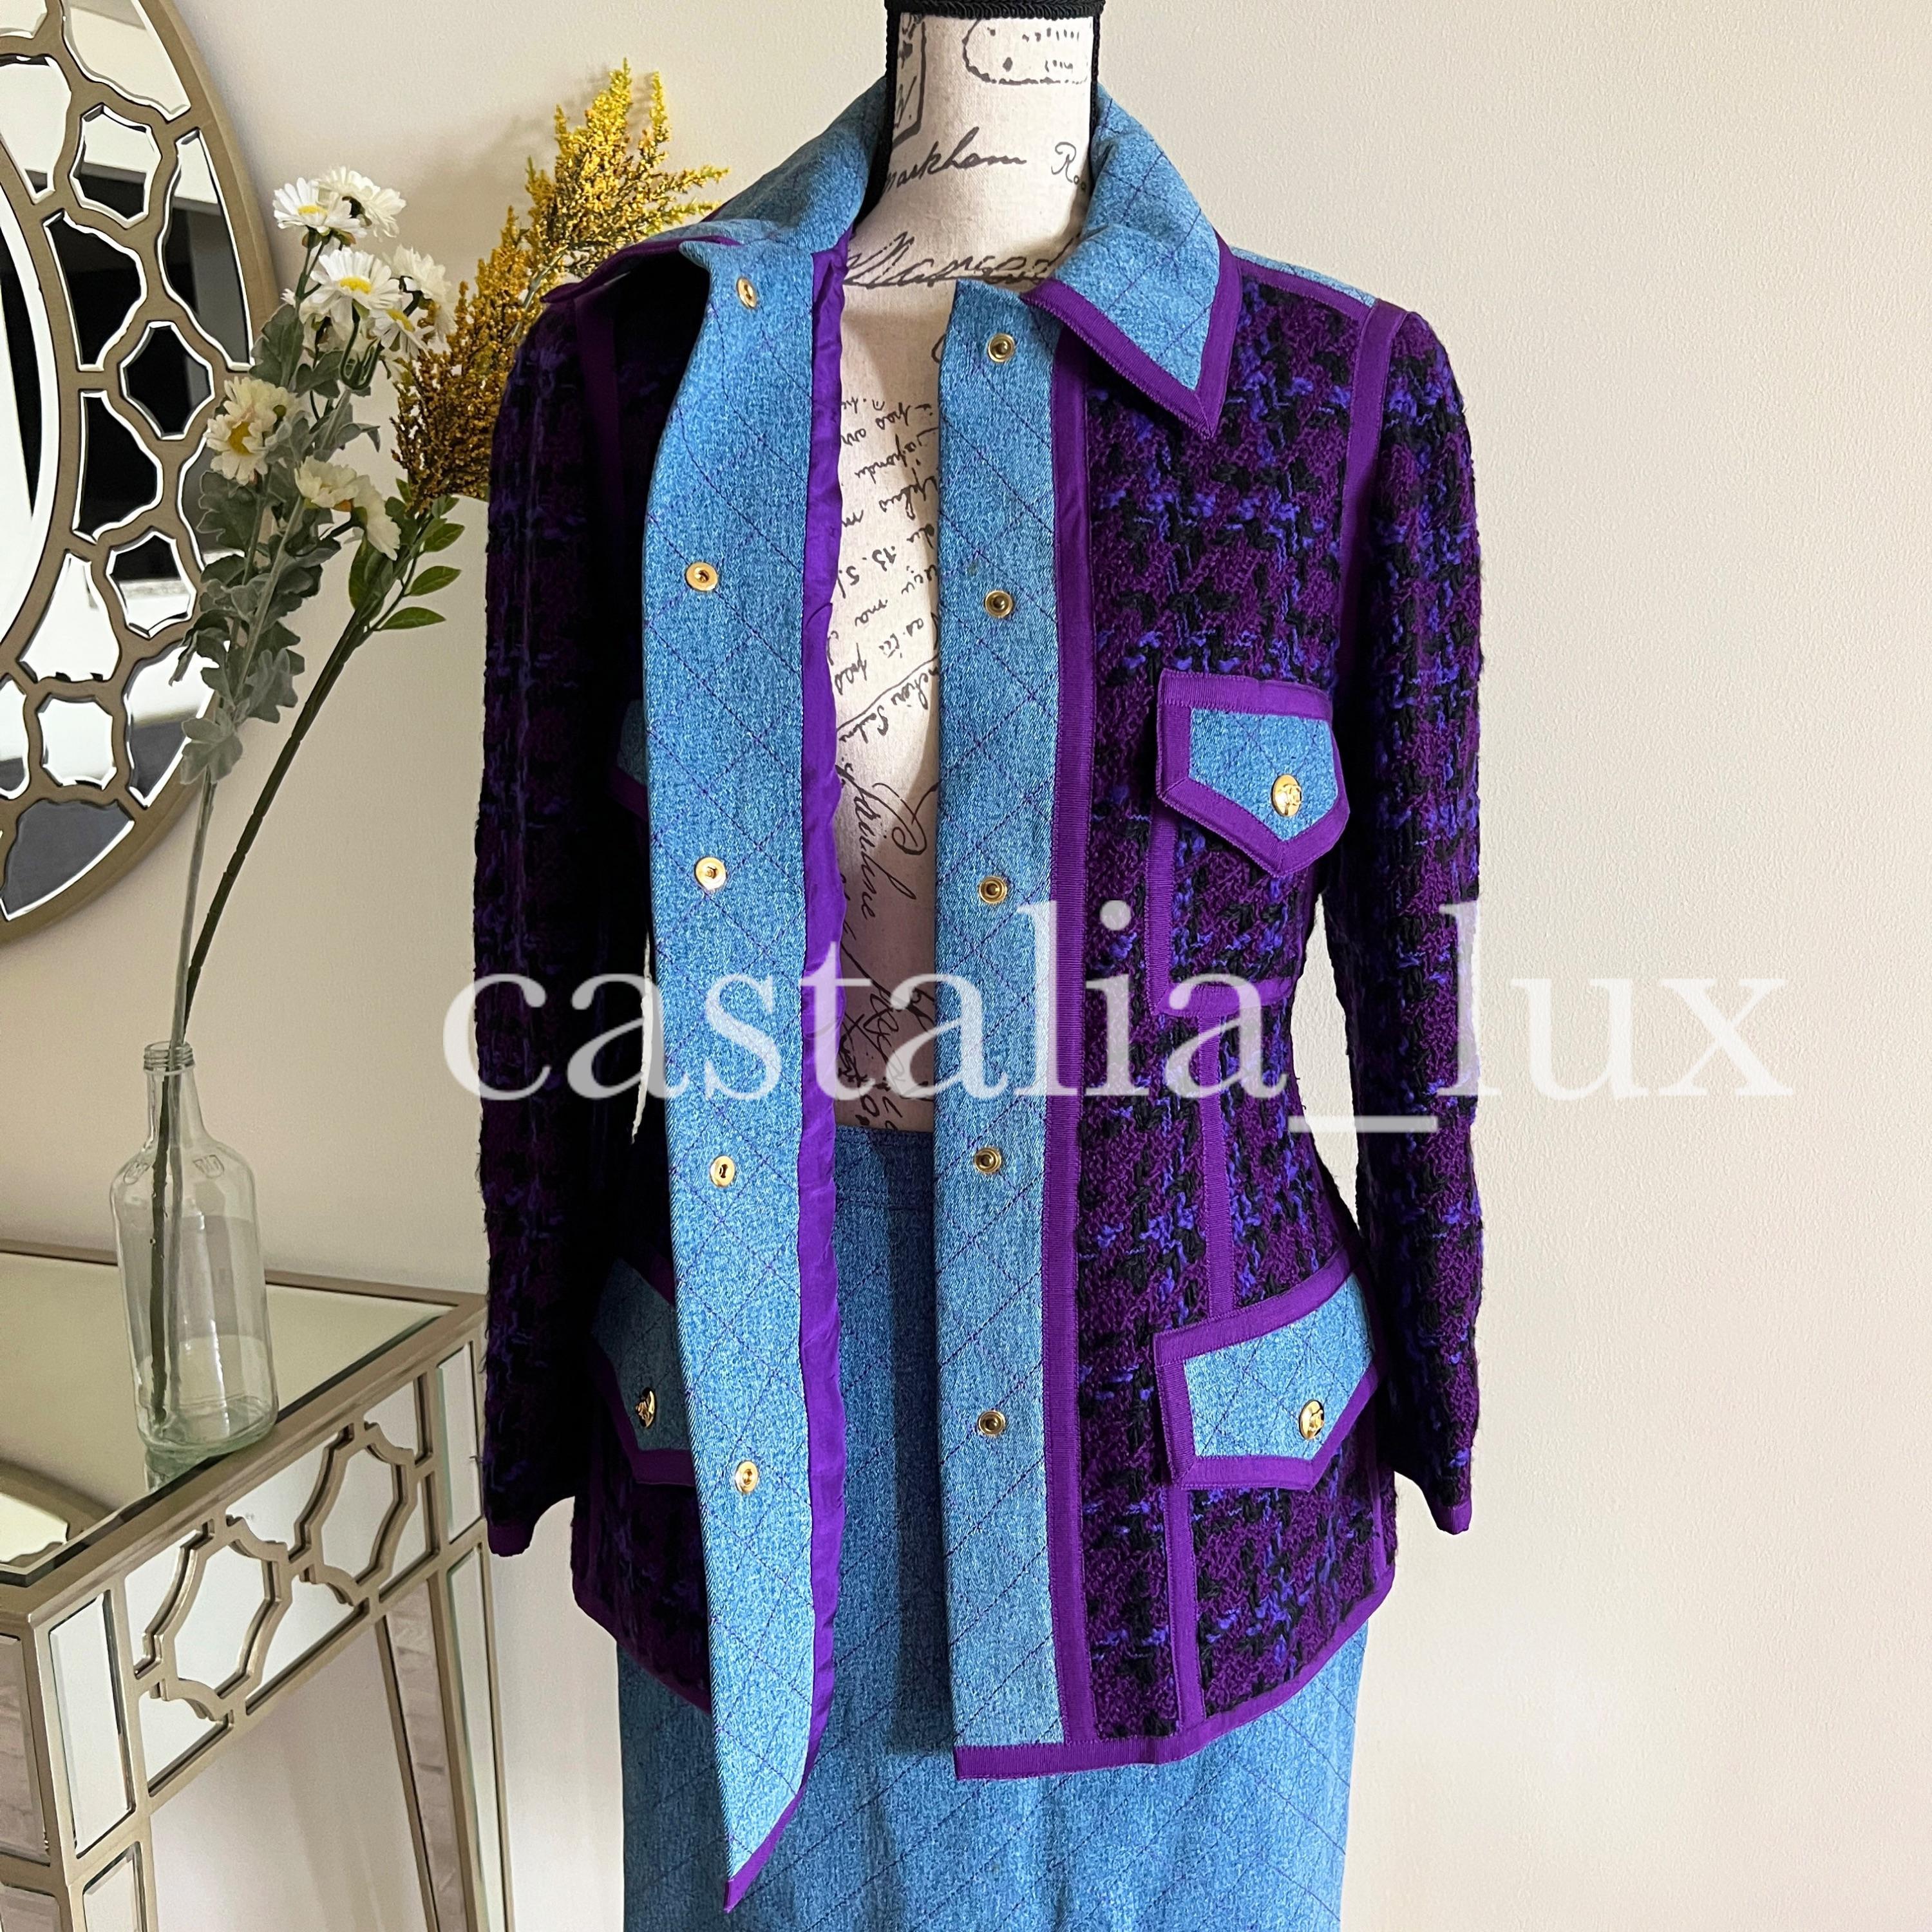 Chanel Rare 1991 Supermodels Tweed and Denim Suit For Sale 12